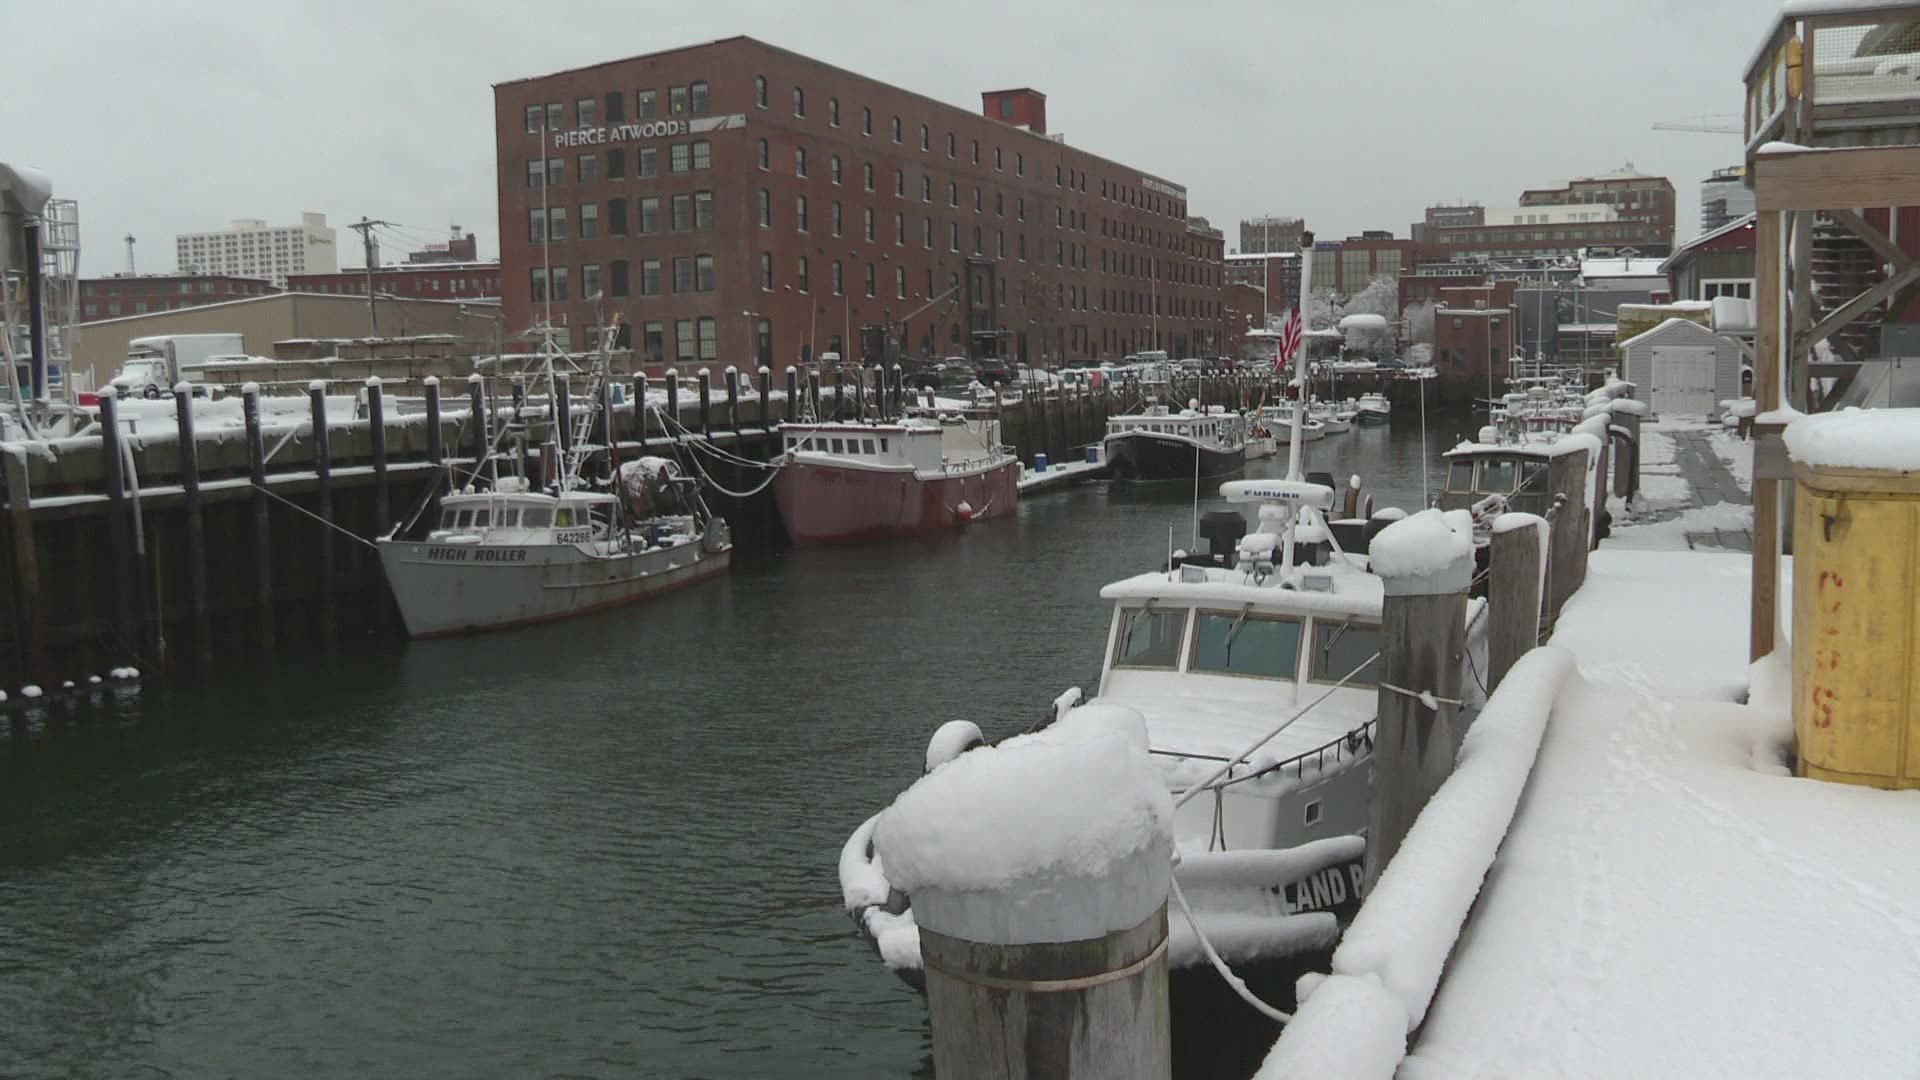 Portland, South Portland, the Portland Harbor Commission, and the ME DOT are applying for federal funding for the project.